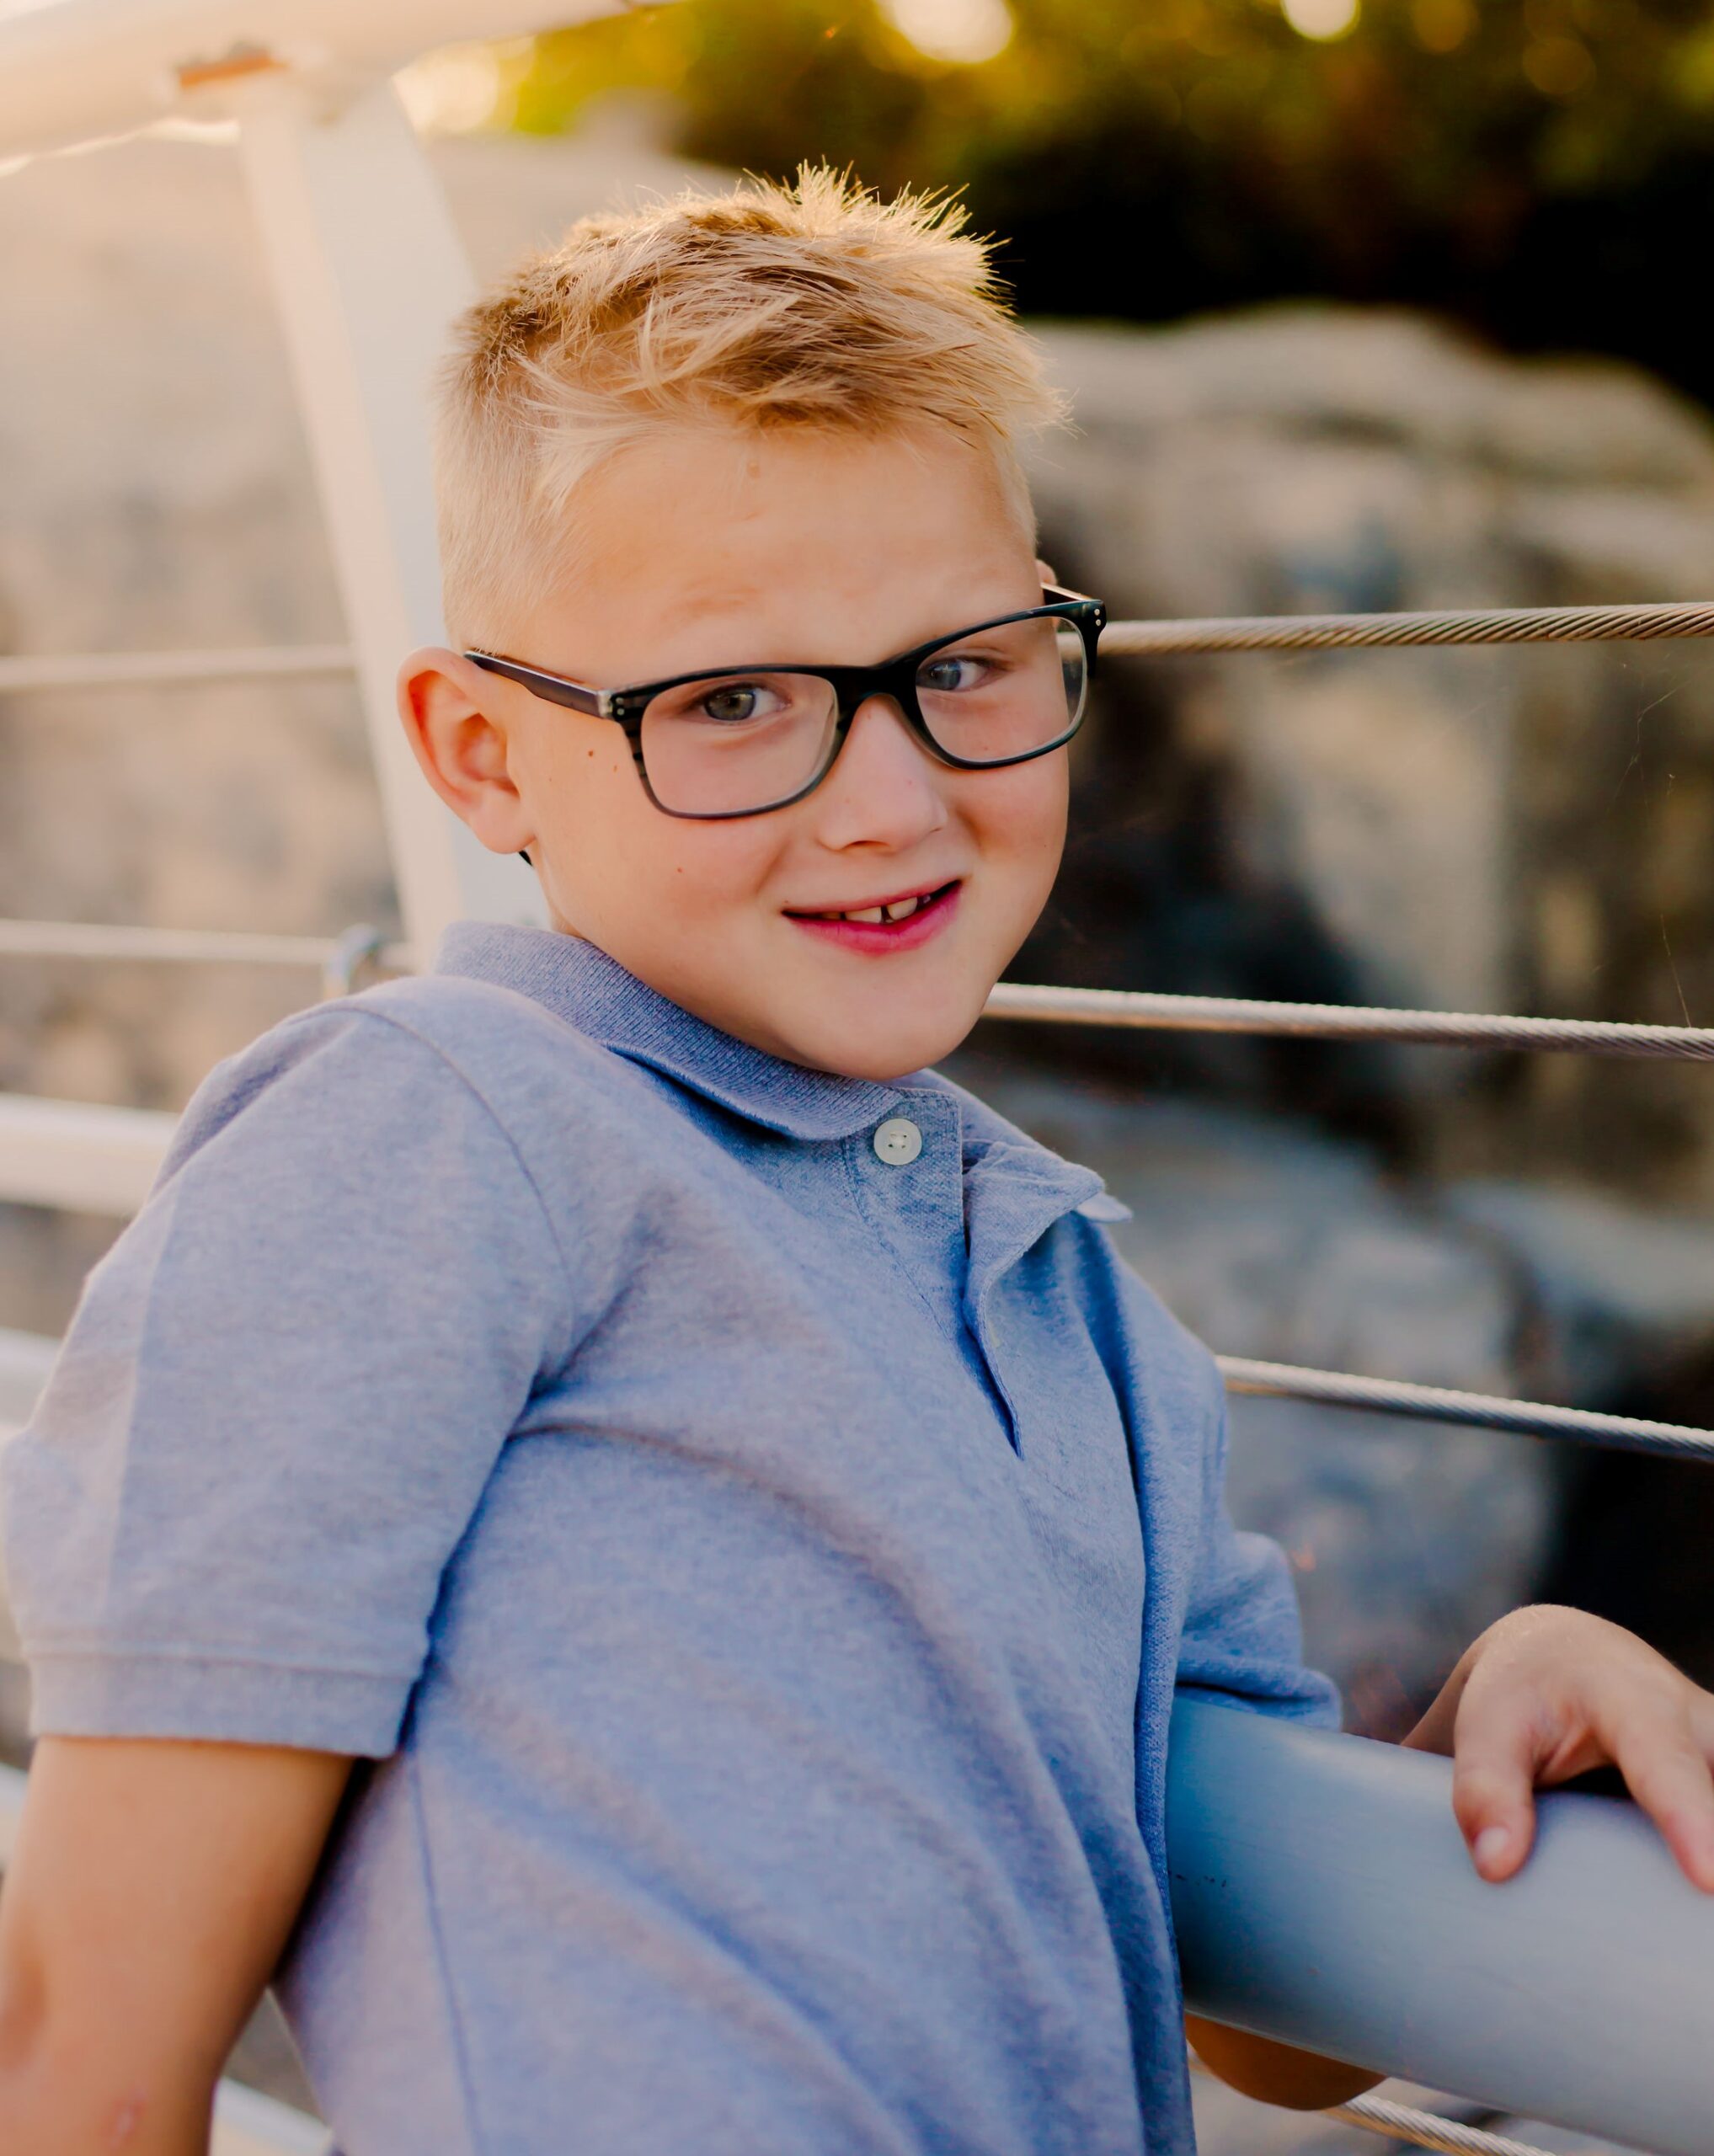 A young boy with short blond hair and glasses stands against a railing outdoors. He is smiling slightly and wearing a light blue polo shirt. The background includes a blurry natural setting with rocks and greenery.